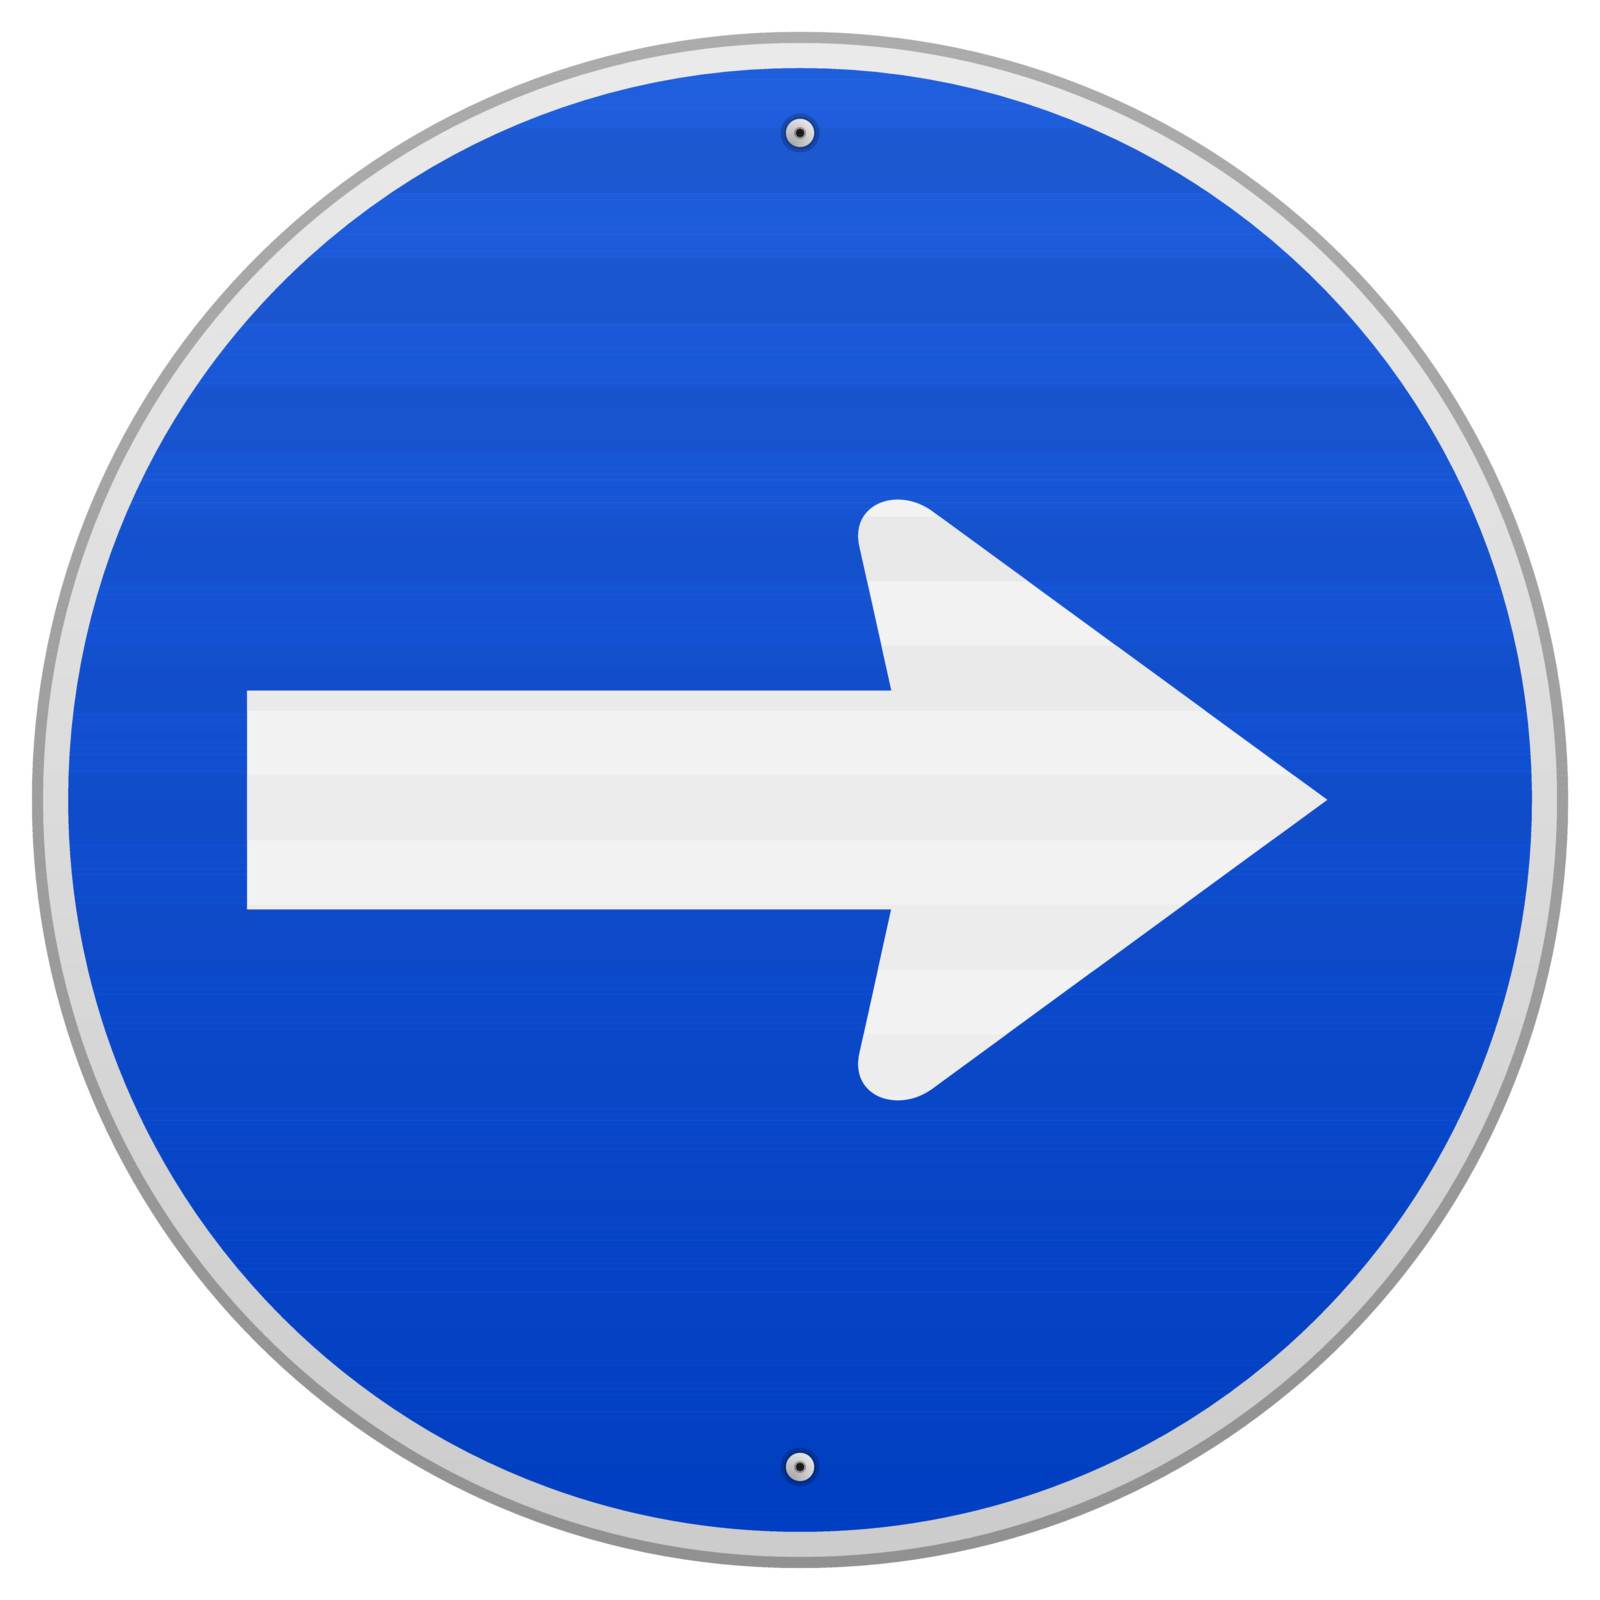 Direction to right as a white arrow on blue sign